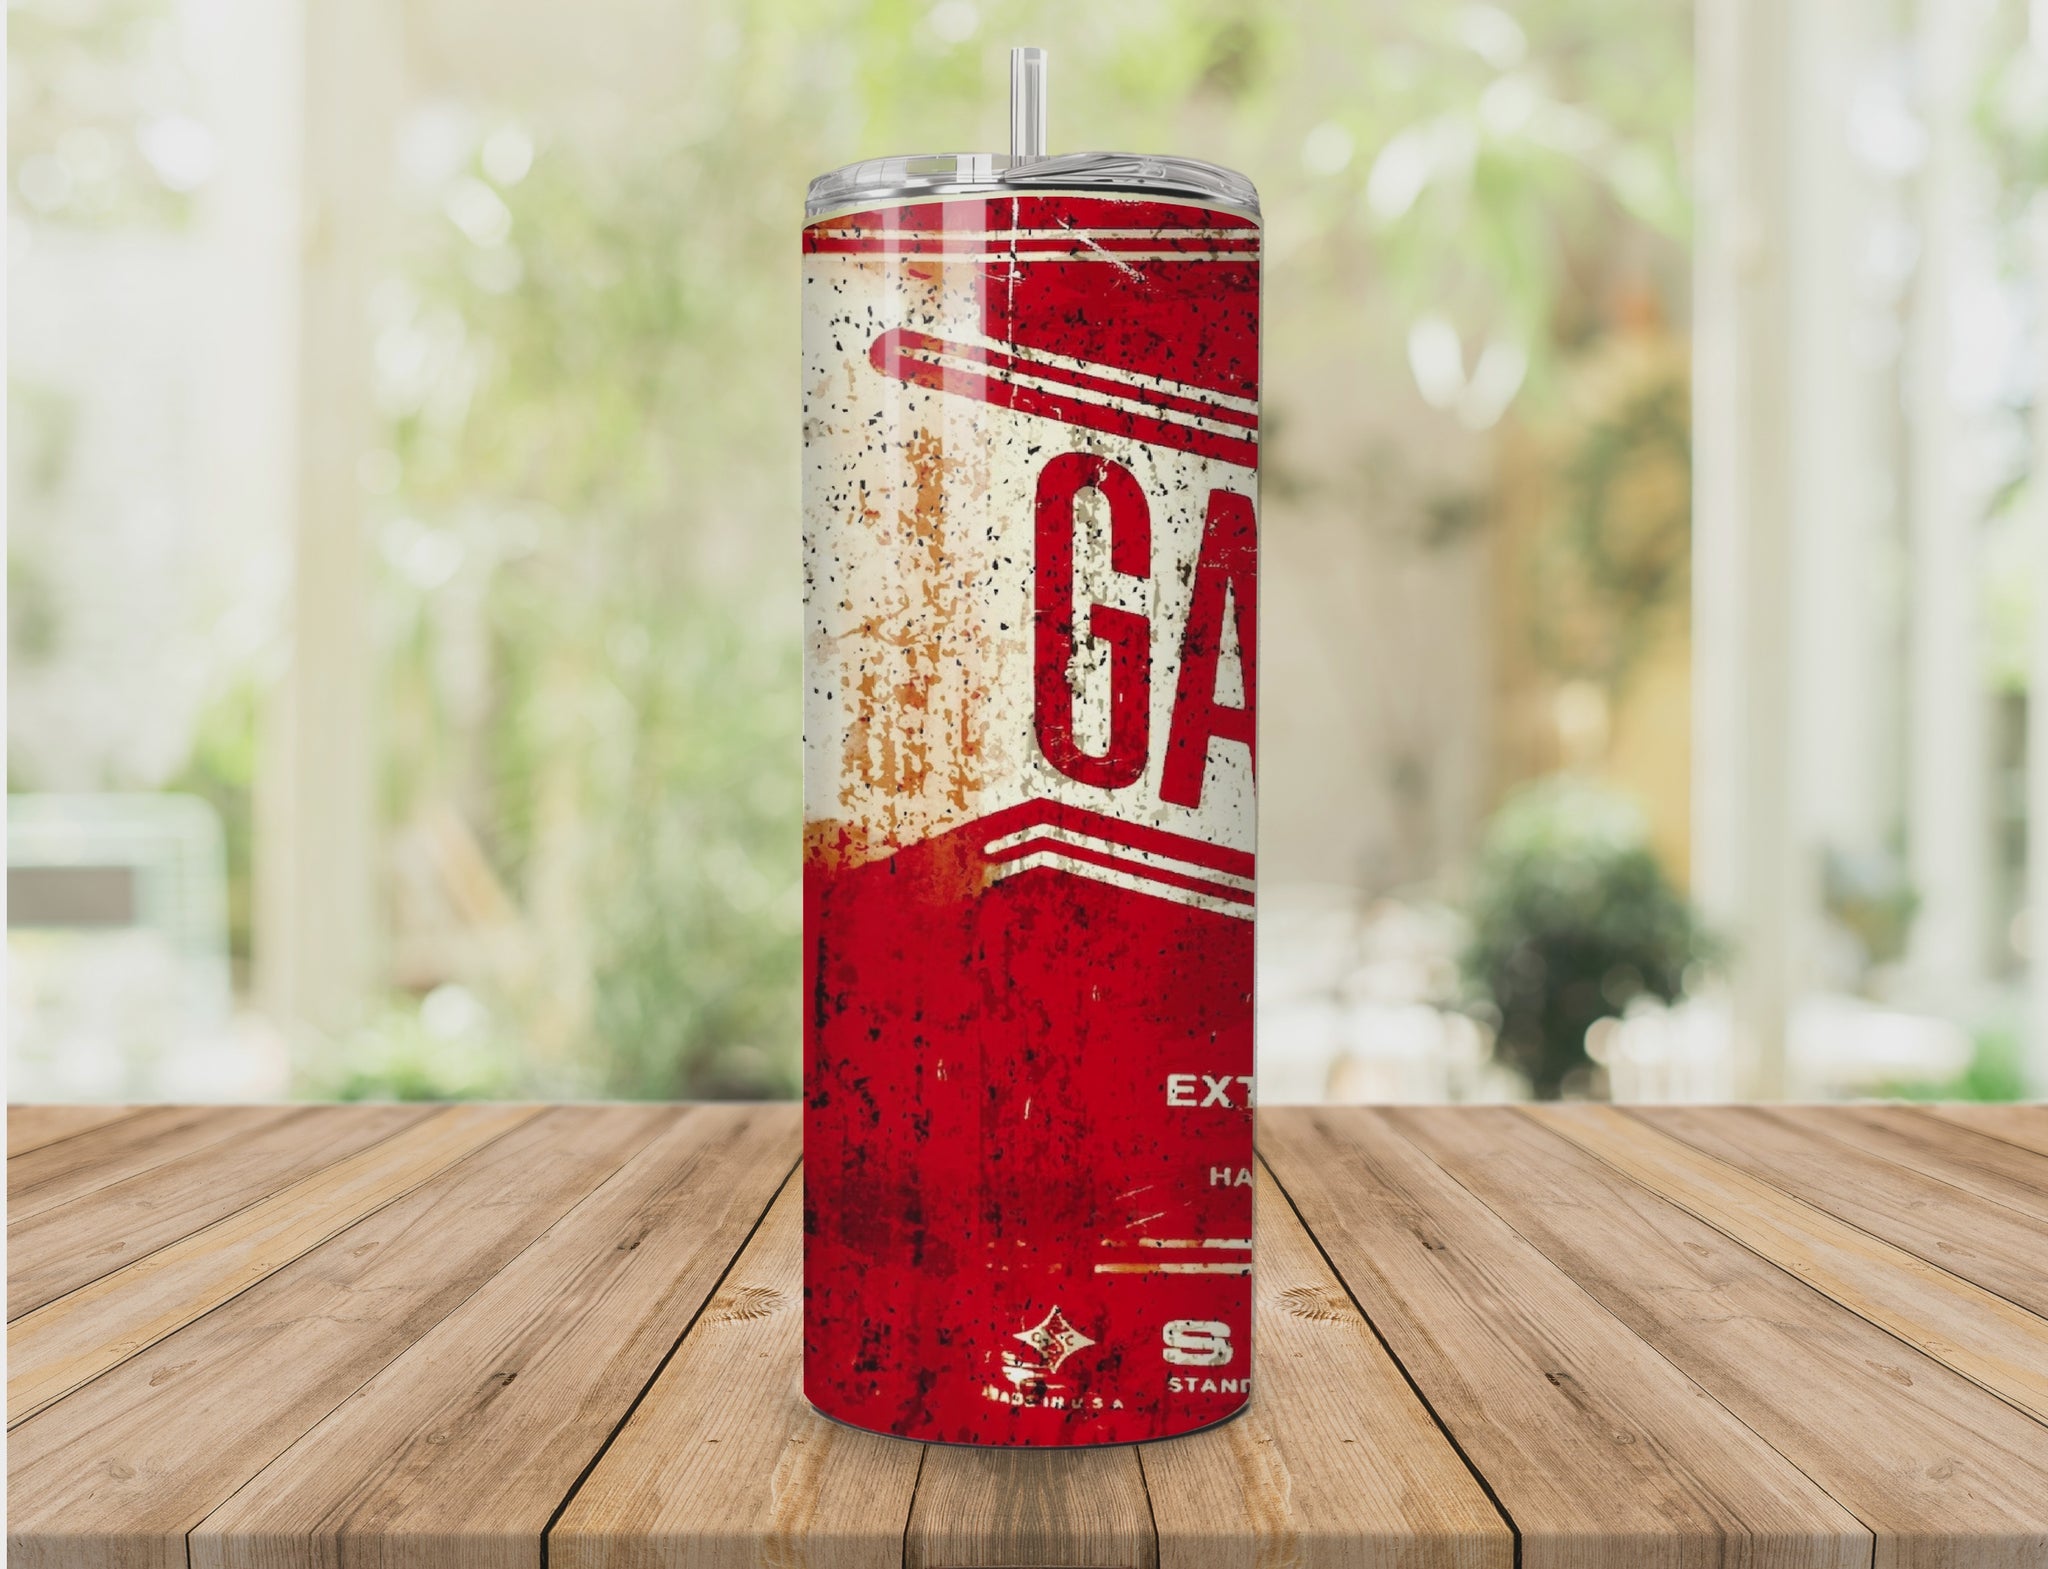 Stainless steel tumbler with double-wall insulation